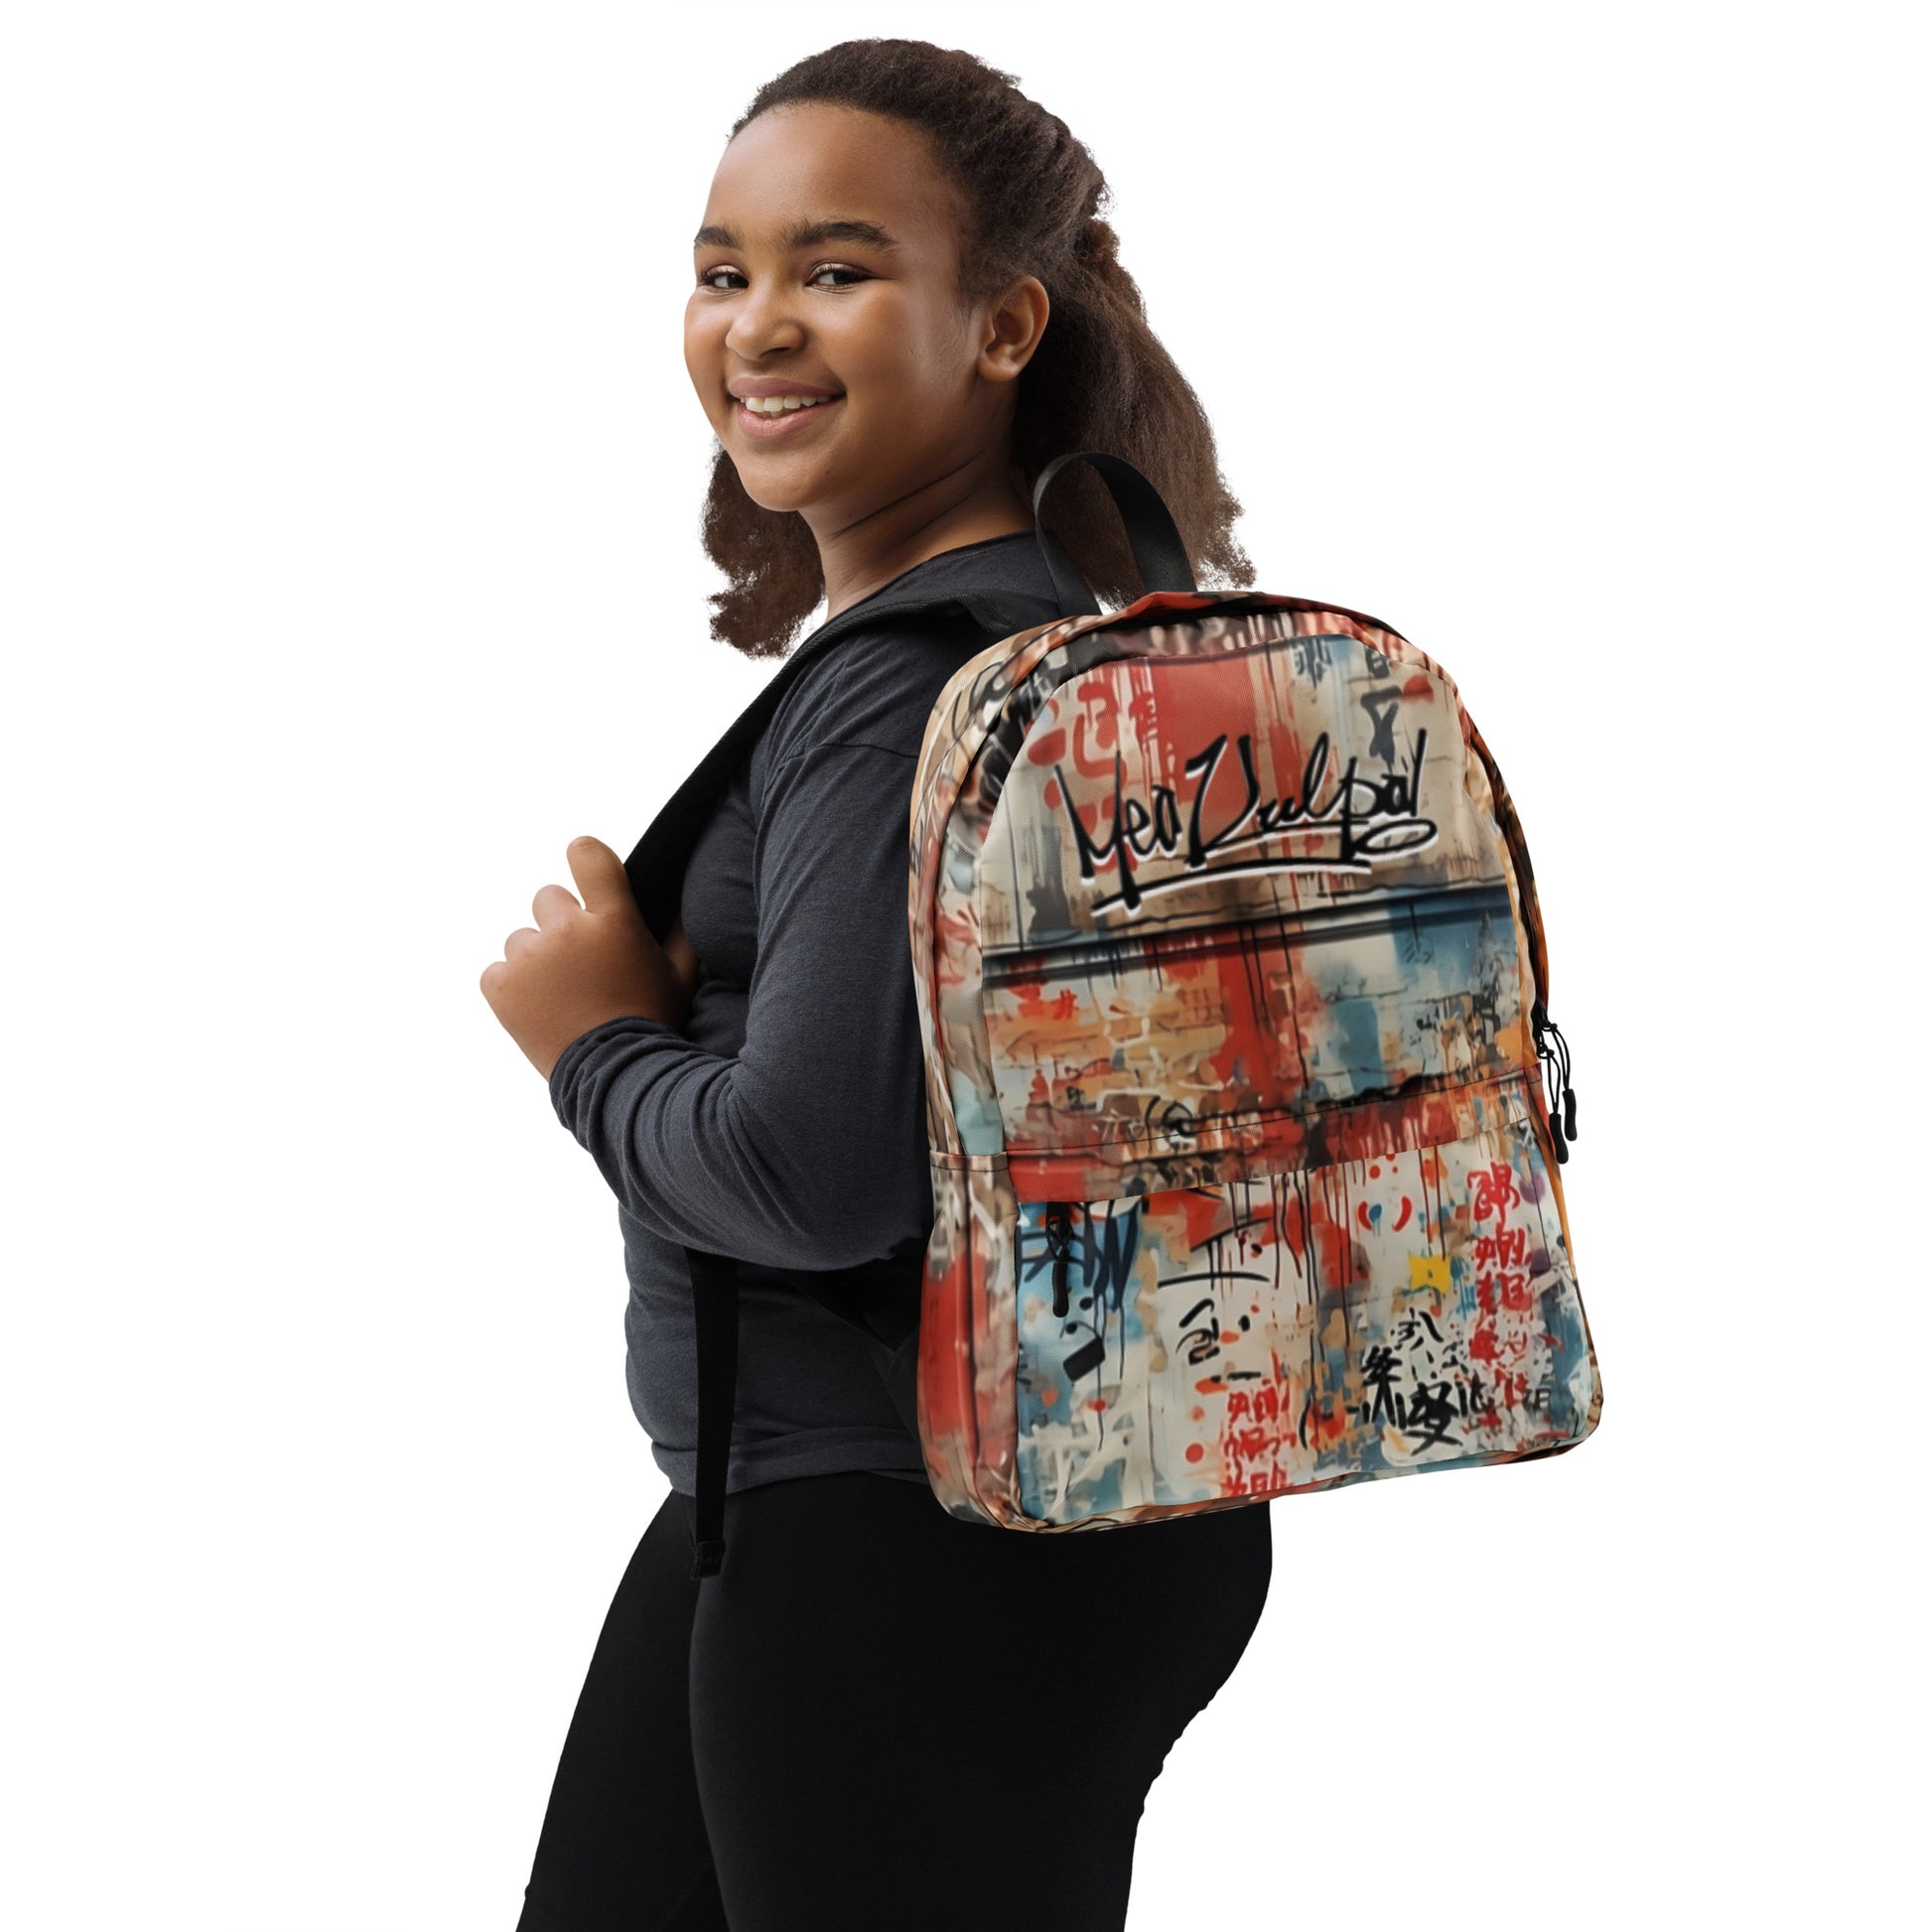 Radiating joy, a happy teenager proudly carries the MeaKulpa Medium Size Backpack. The graffiti design mirrors the exuberance of youth, adding a pop of personality to her ensemble. The backpack, a perfect blend of style and functionality, effortlessly complements the teenager's dynamic and carefree spirit. A delightful embodiment of individuality and on-the-go flair.